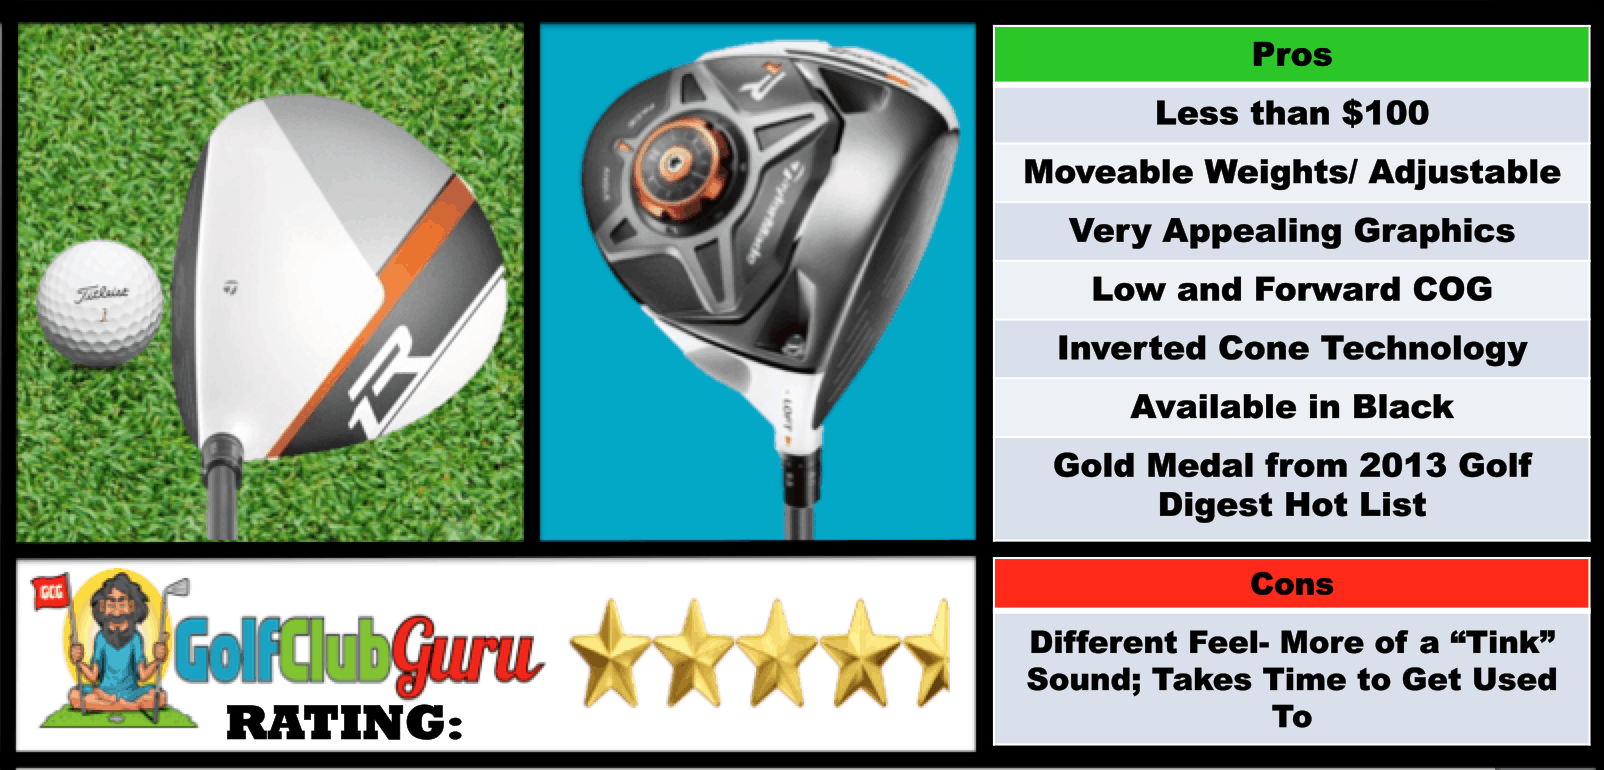 TaylorMade R1 Driver Under 100